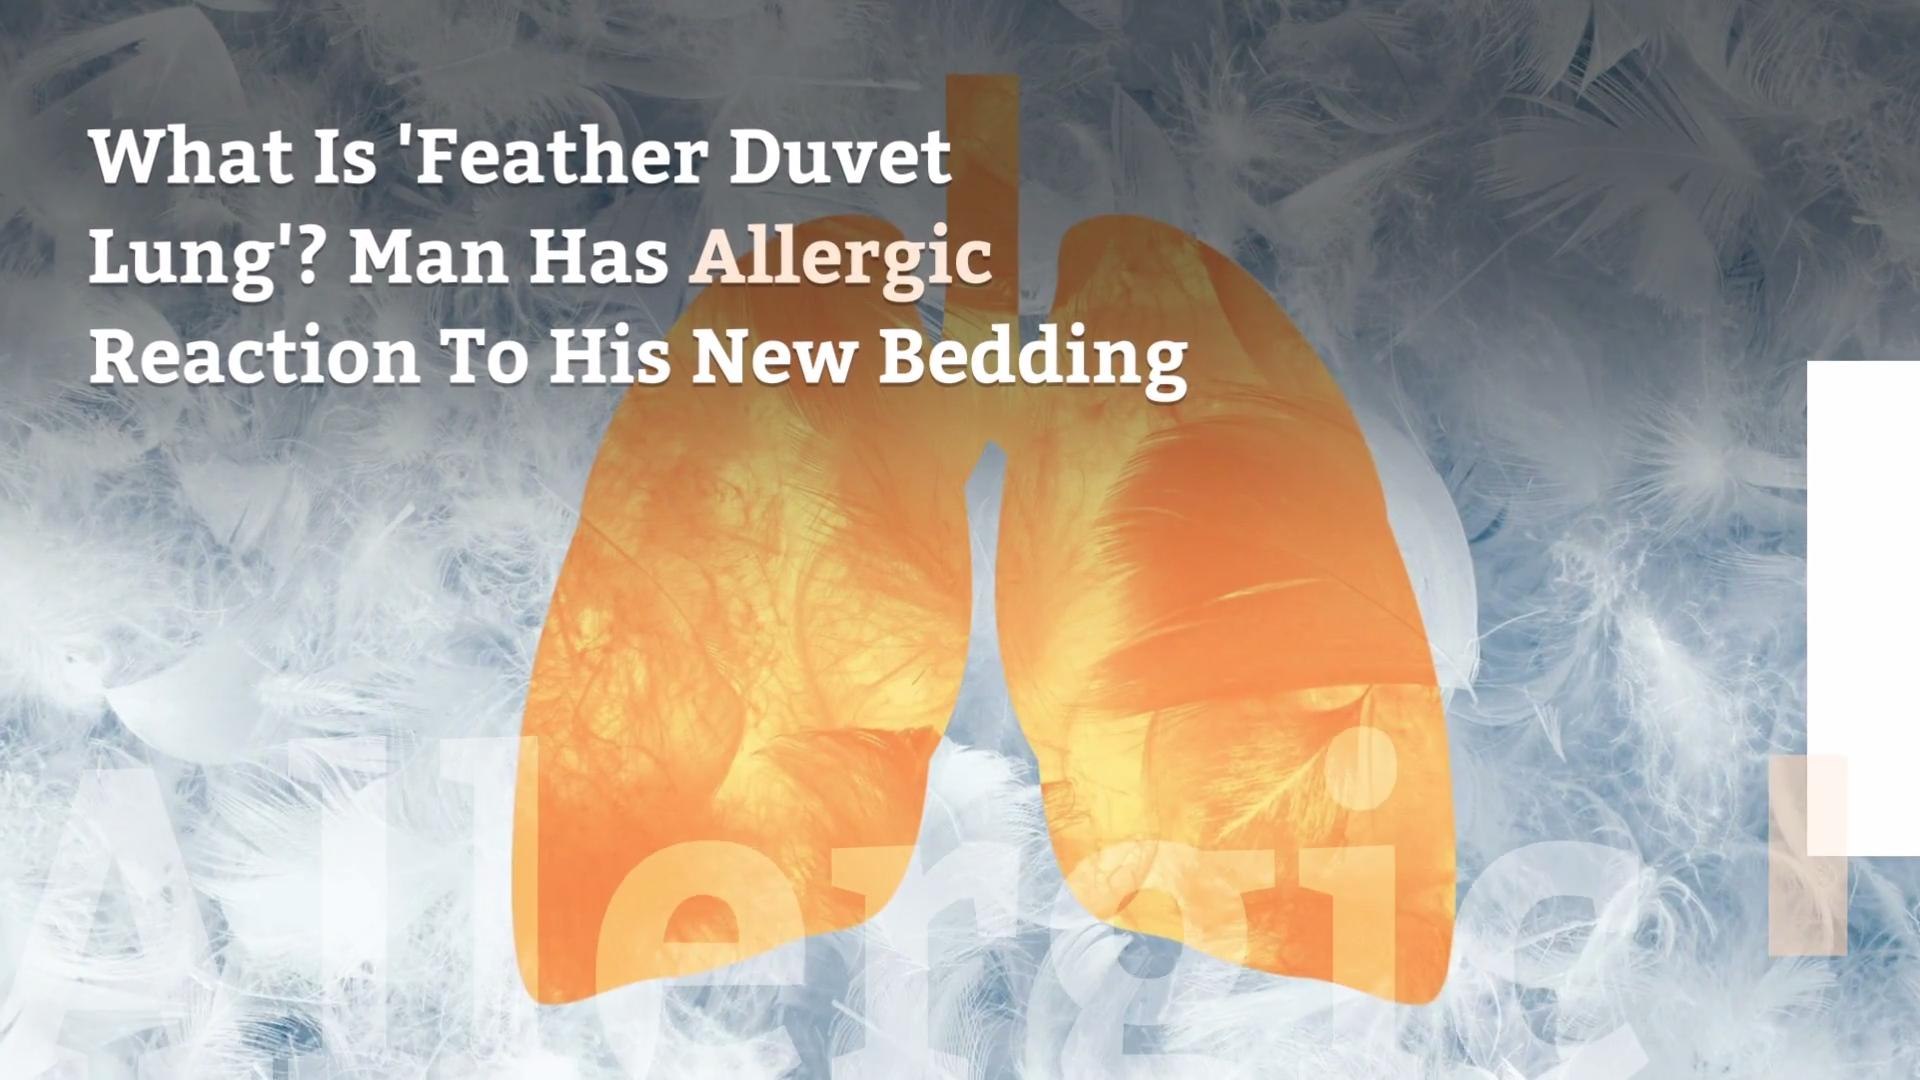 What Is Feather Duvet Lung Man Has Allergic Reaction To His New